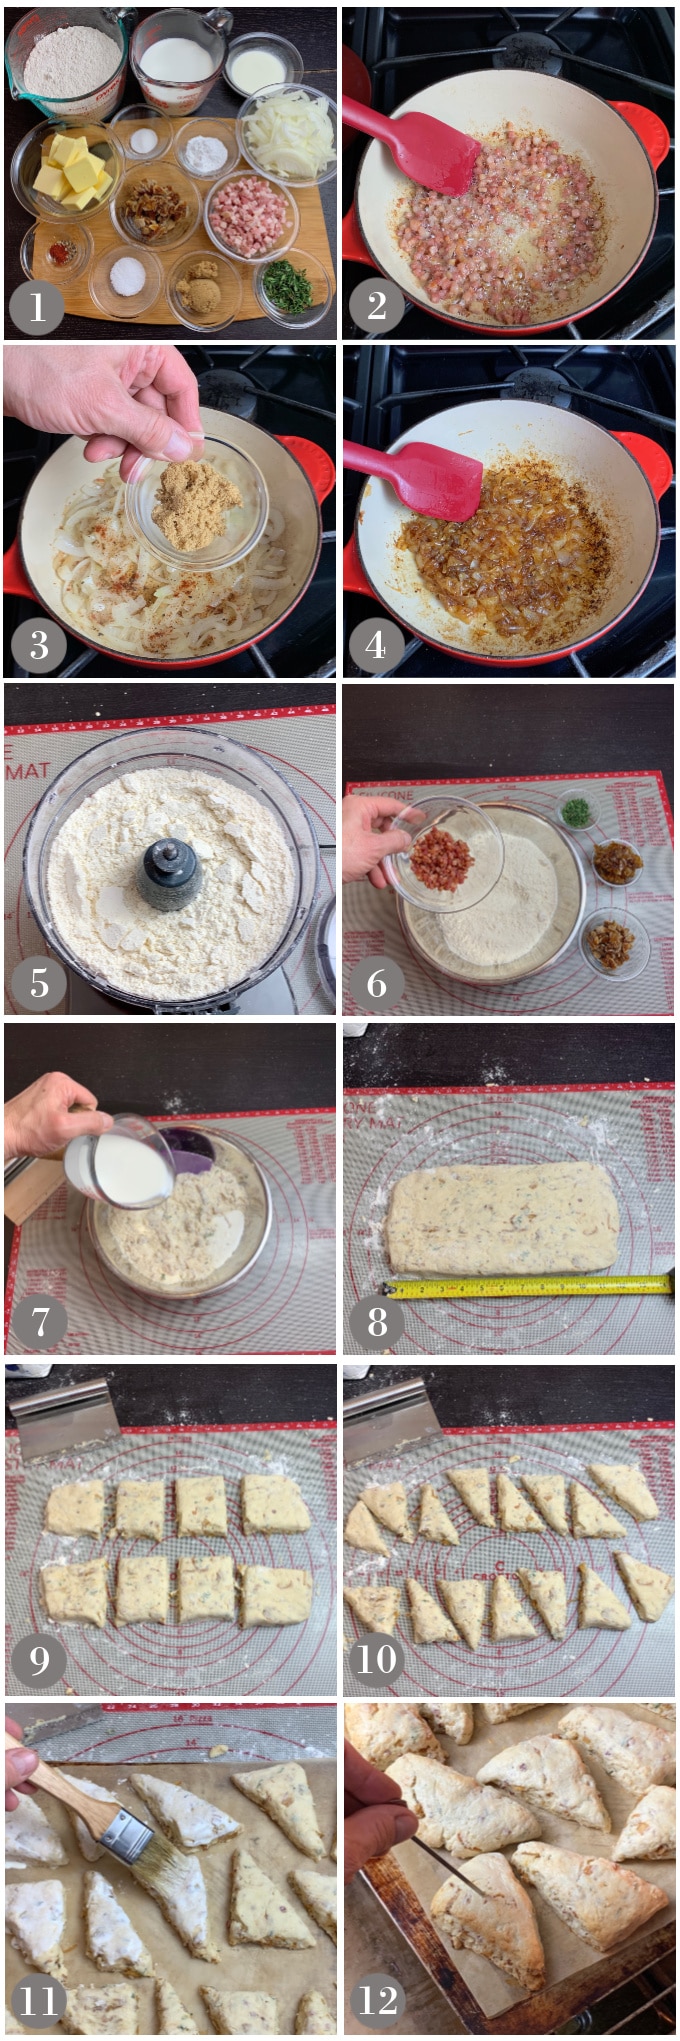 A collage of photos showing the ingredients and step to make onion, fig and pancetta scones.